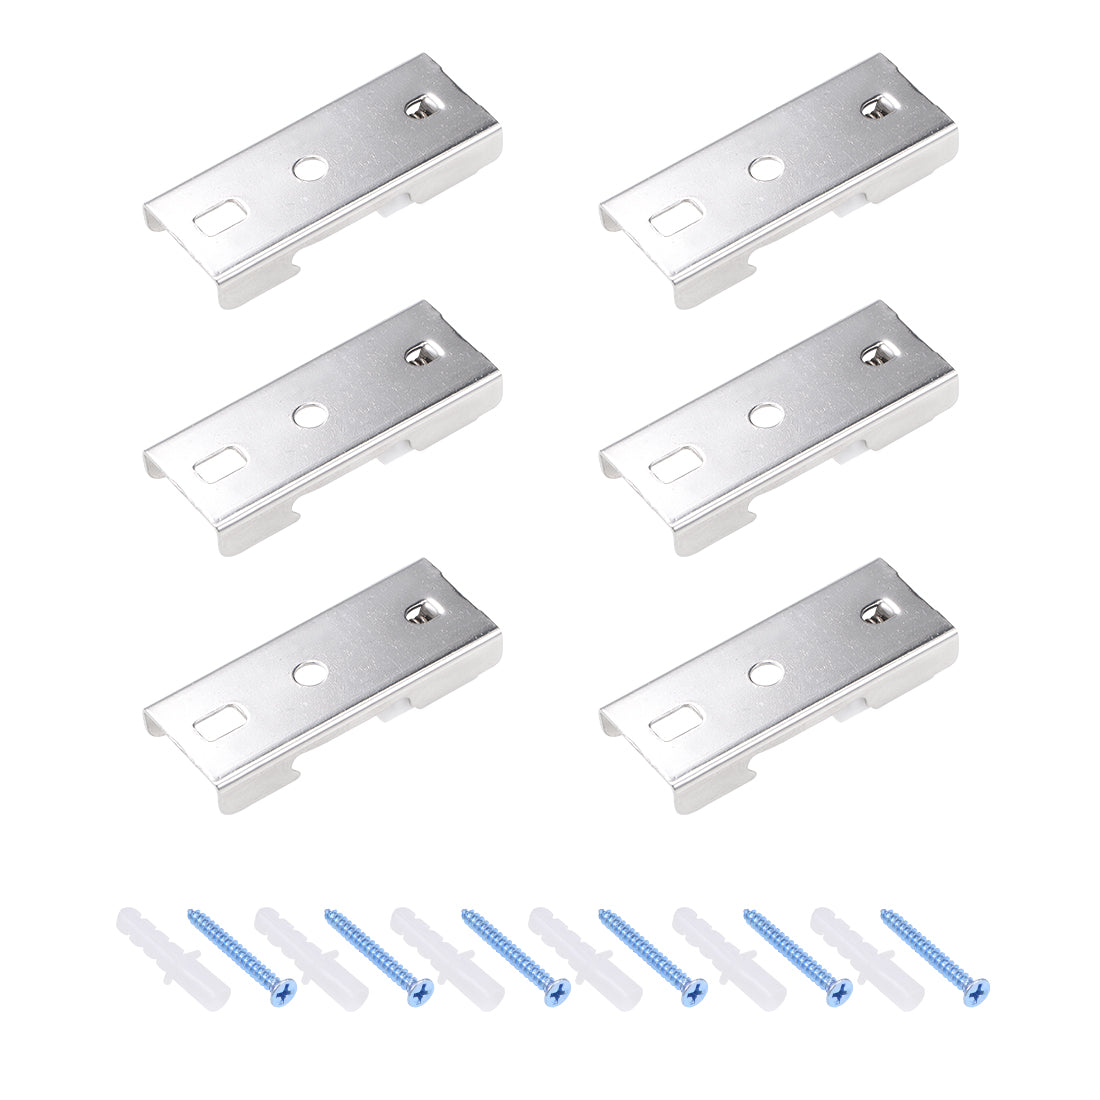 uxcell Uxcell Curtain Rod Bracket Stainless Steel Drapery Track Holder for 20mm Rail Top Mounted on Ceiling 6 Pcs